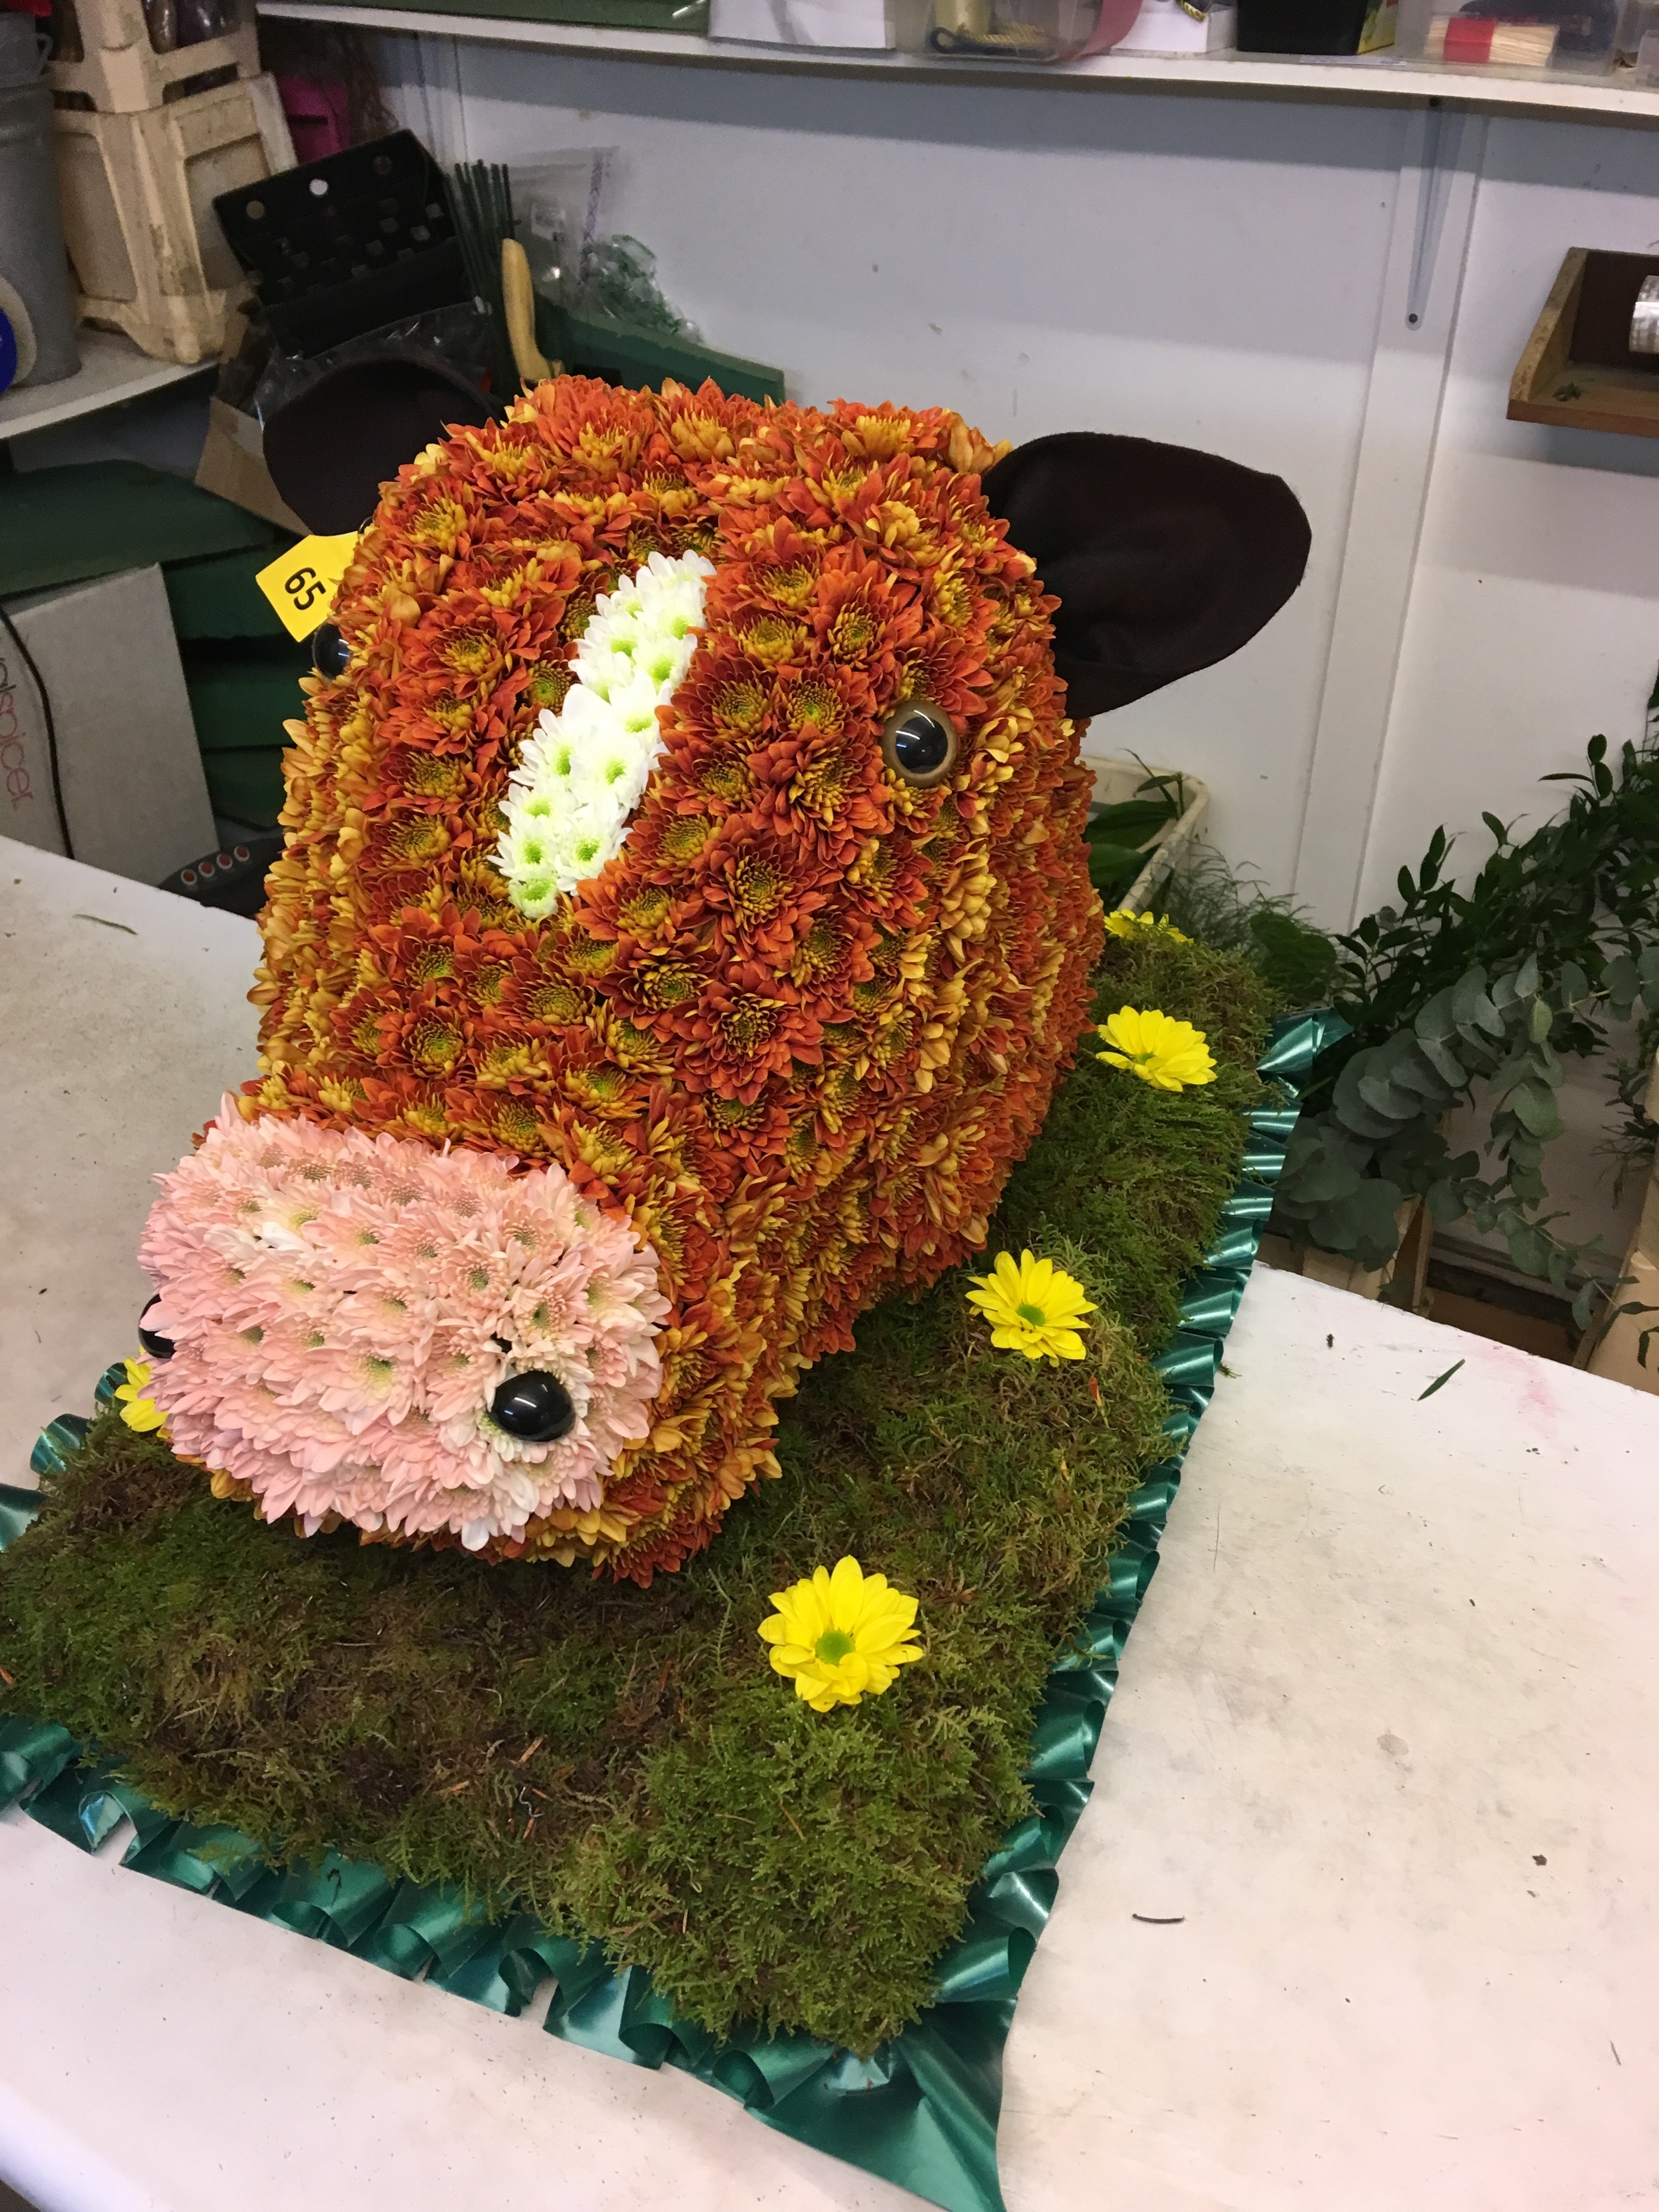 Cows Head made from flowers